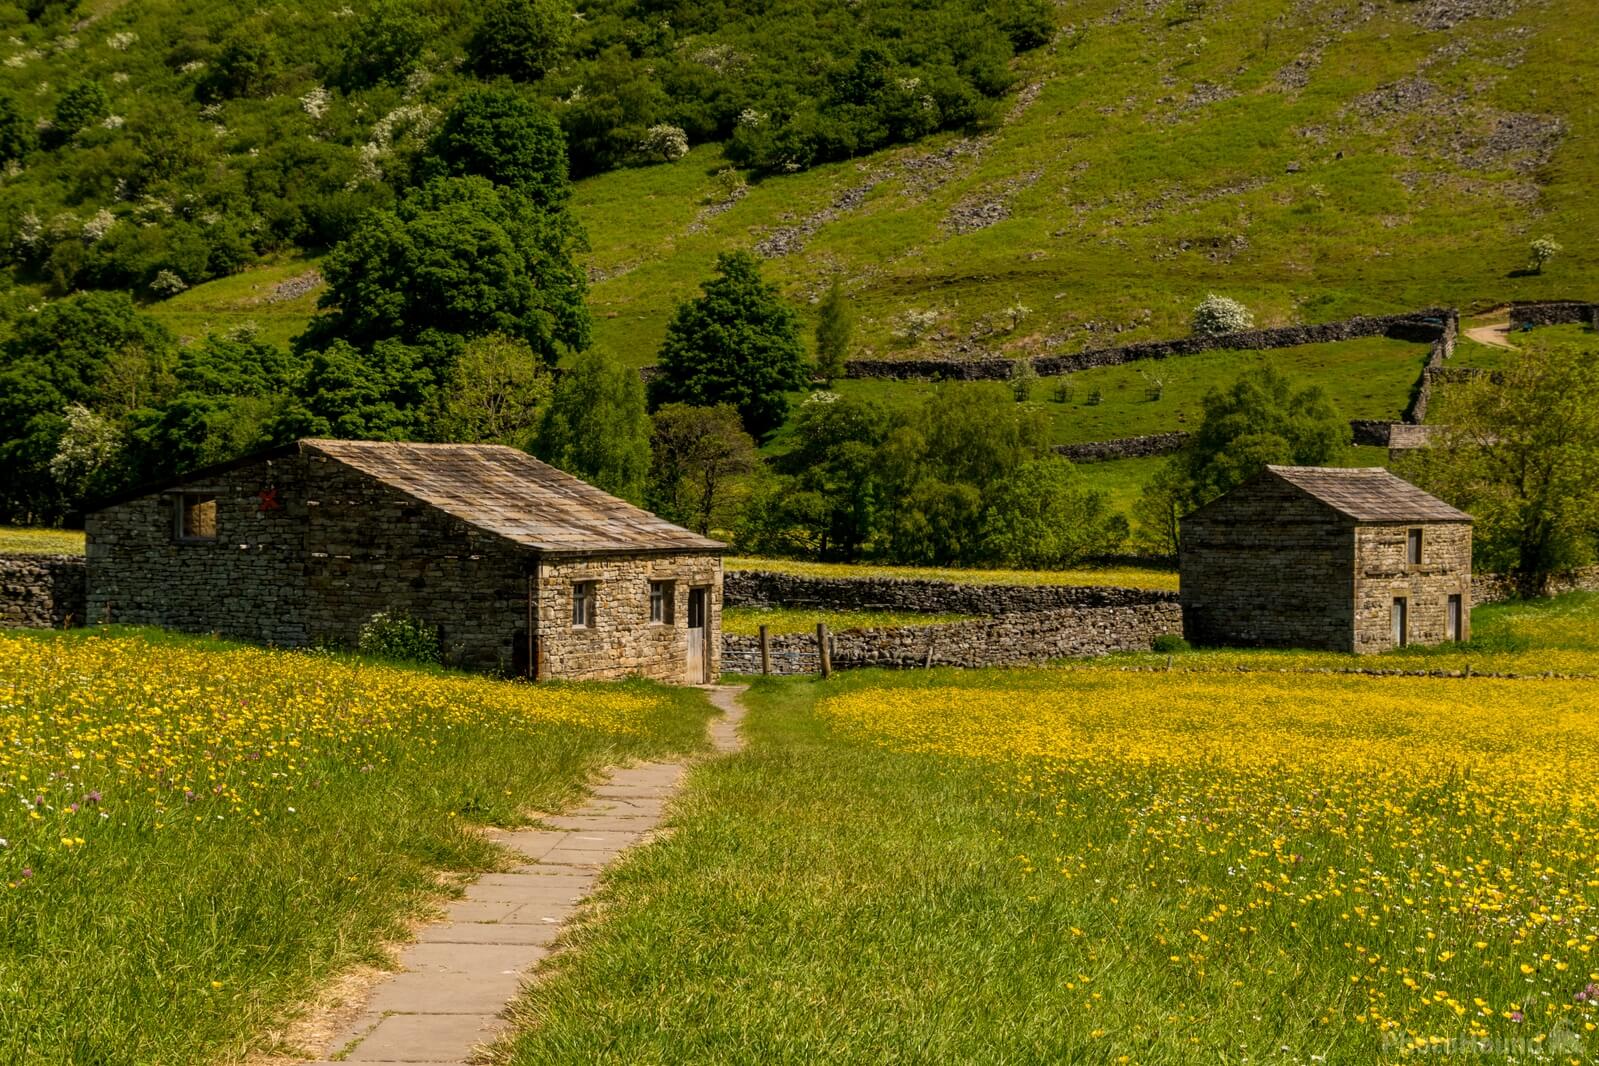 Image of Muker Meadows, Swaledale by Andy Killingbeck